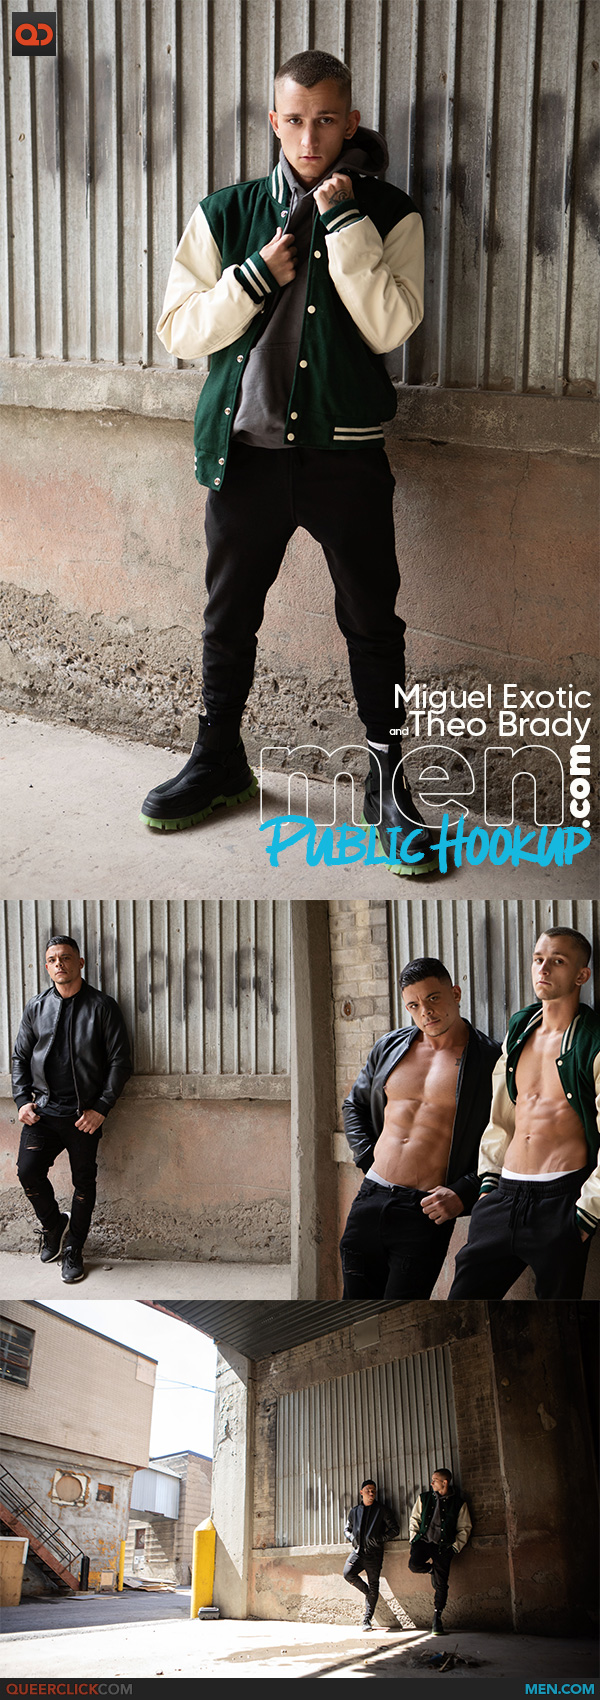 Men.com: Theo Brady and Miguel Exotic - Miguel and Theo's Public Hookup